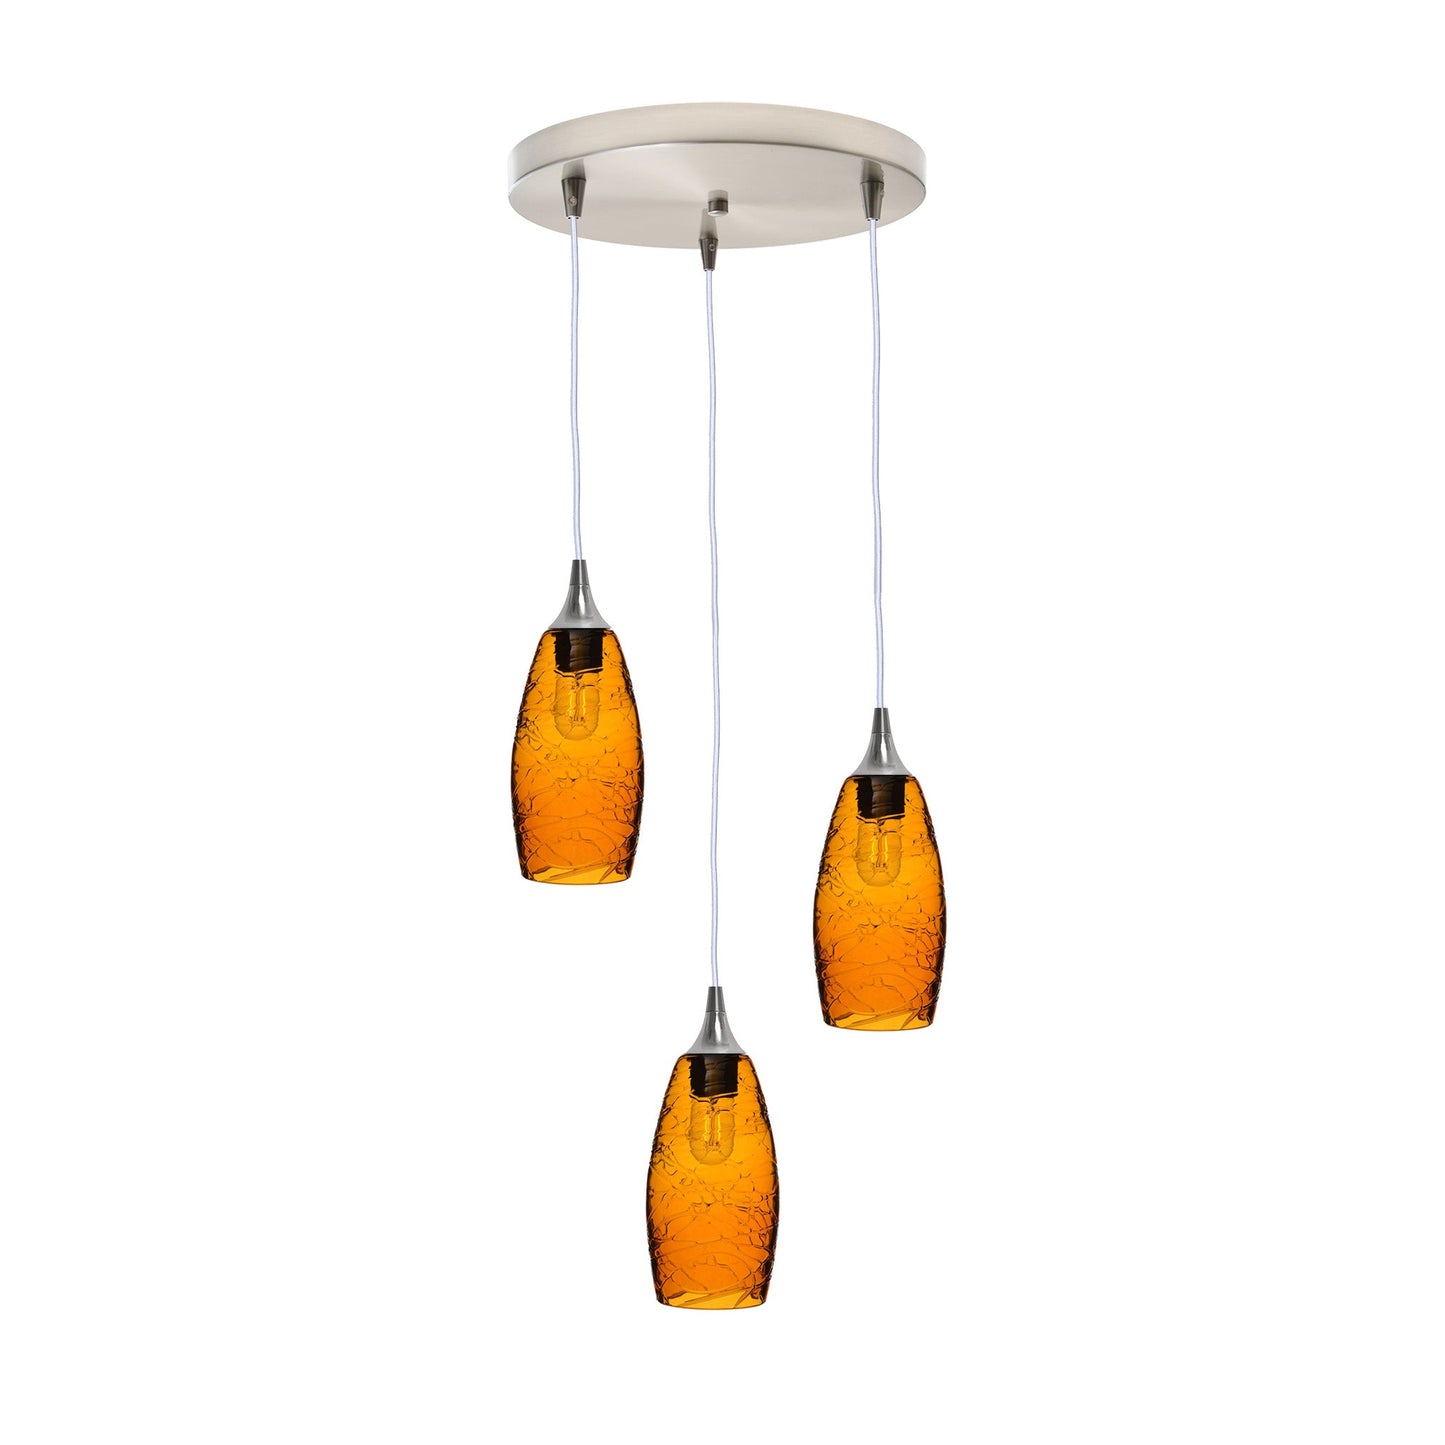 147 Spun: 3 Pendant Cascade Chandelier-Glass-Bicycle Glass Co - Hotshop-Golden Amber-Brushed Nickel-Bicycle Glass Co